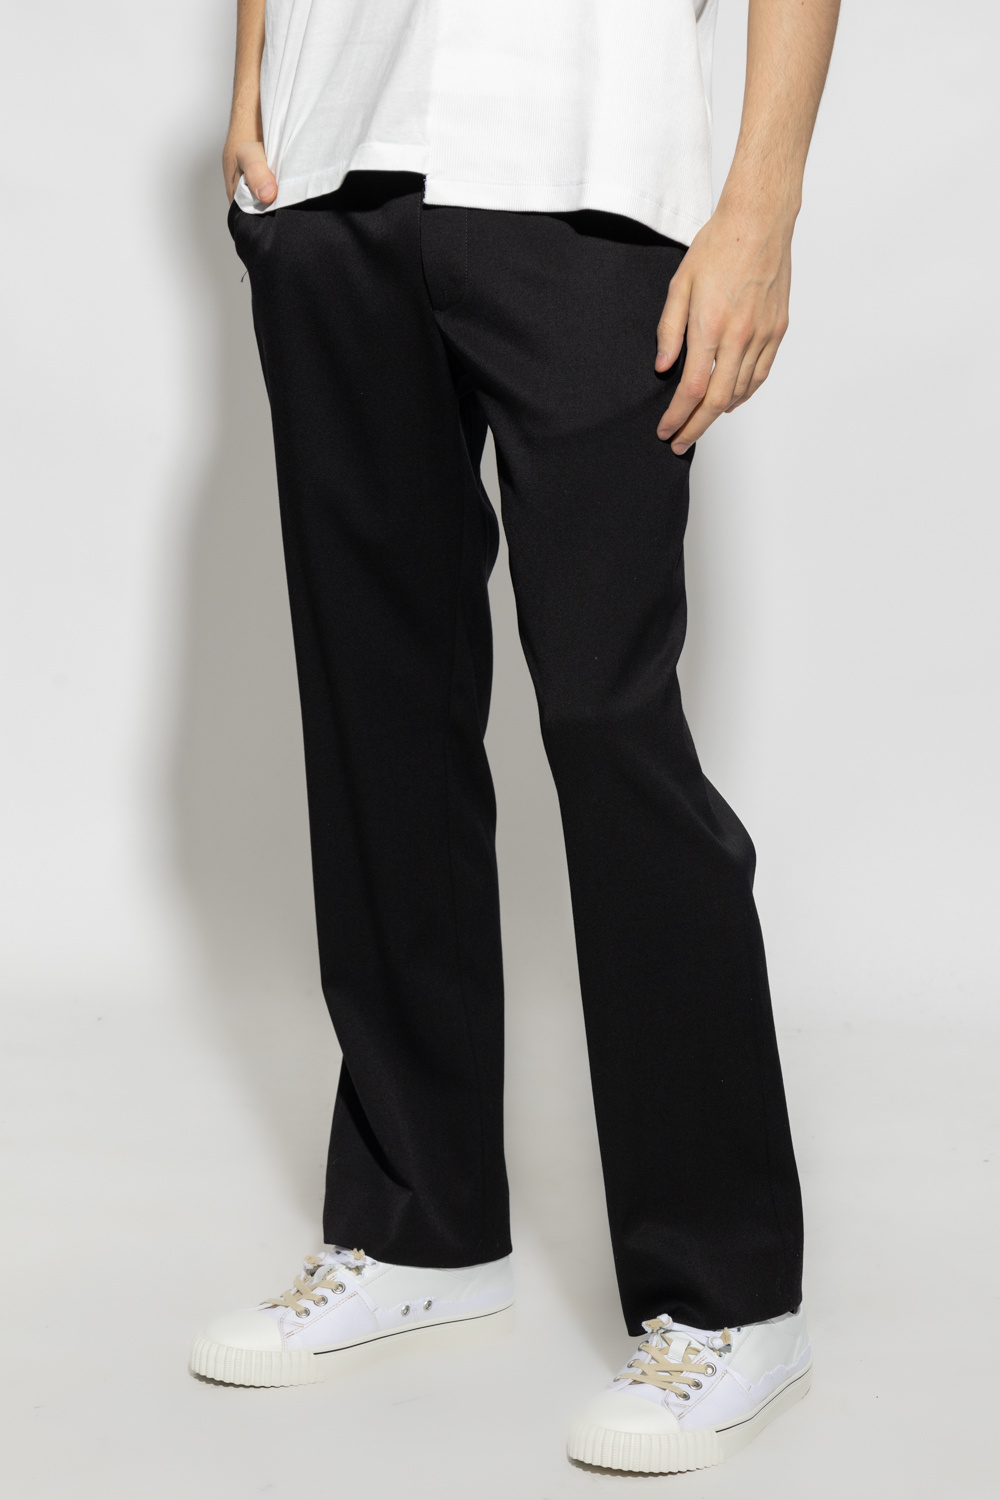 MM6 Maison Margiela trousers Patta with straight legs